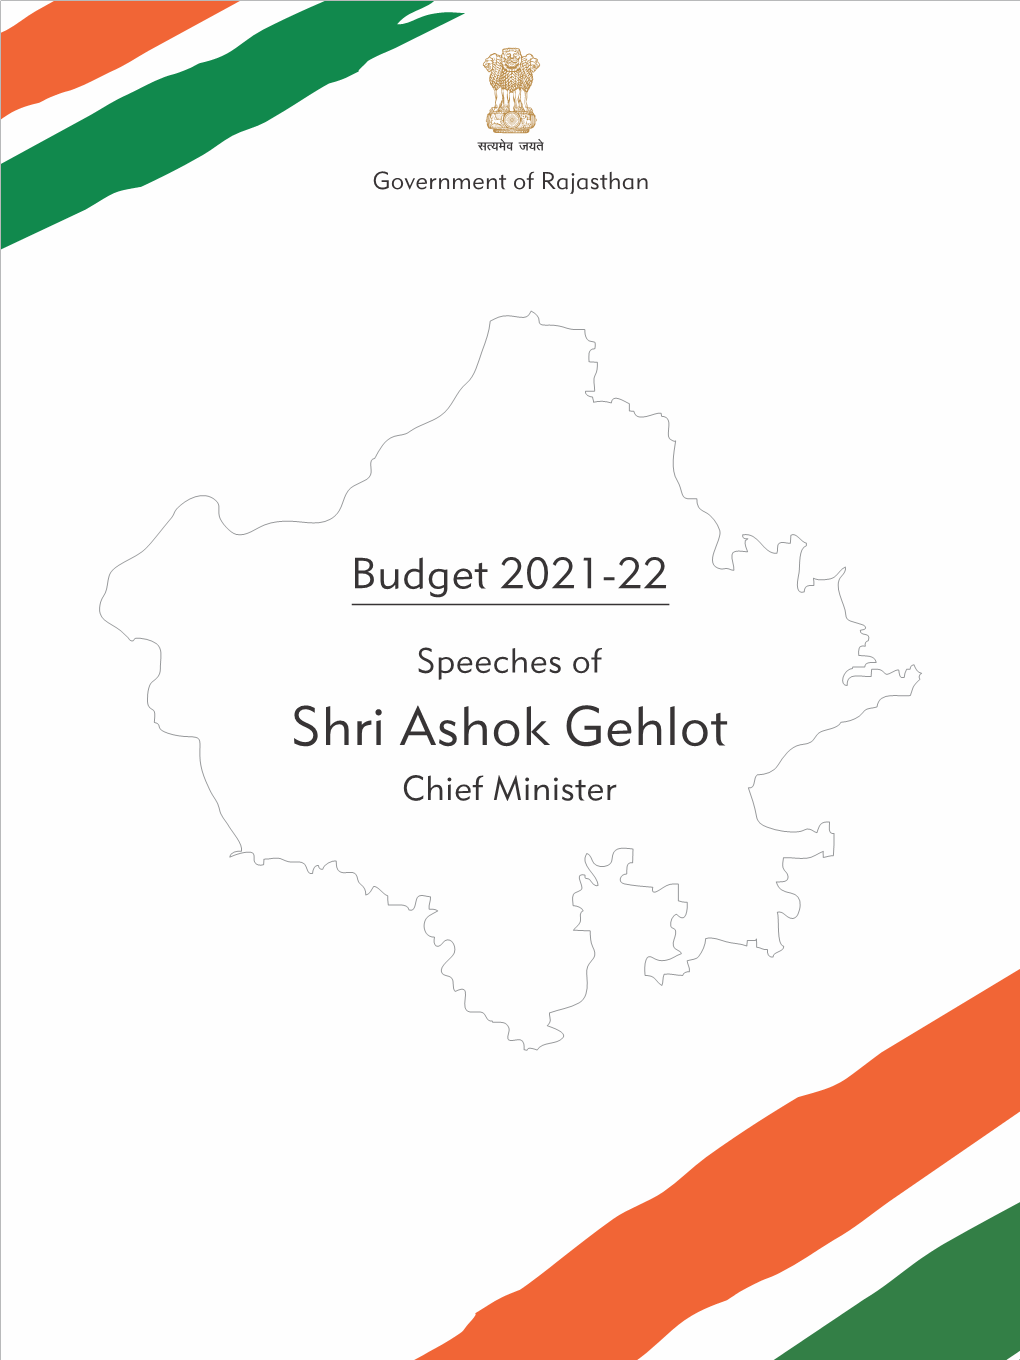 Budget 2021-2022 Speeches of Chief Minister (English Version)